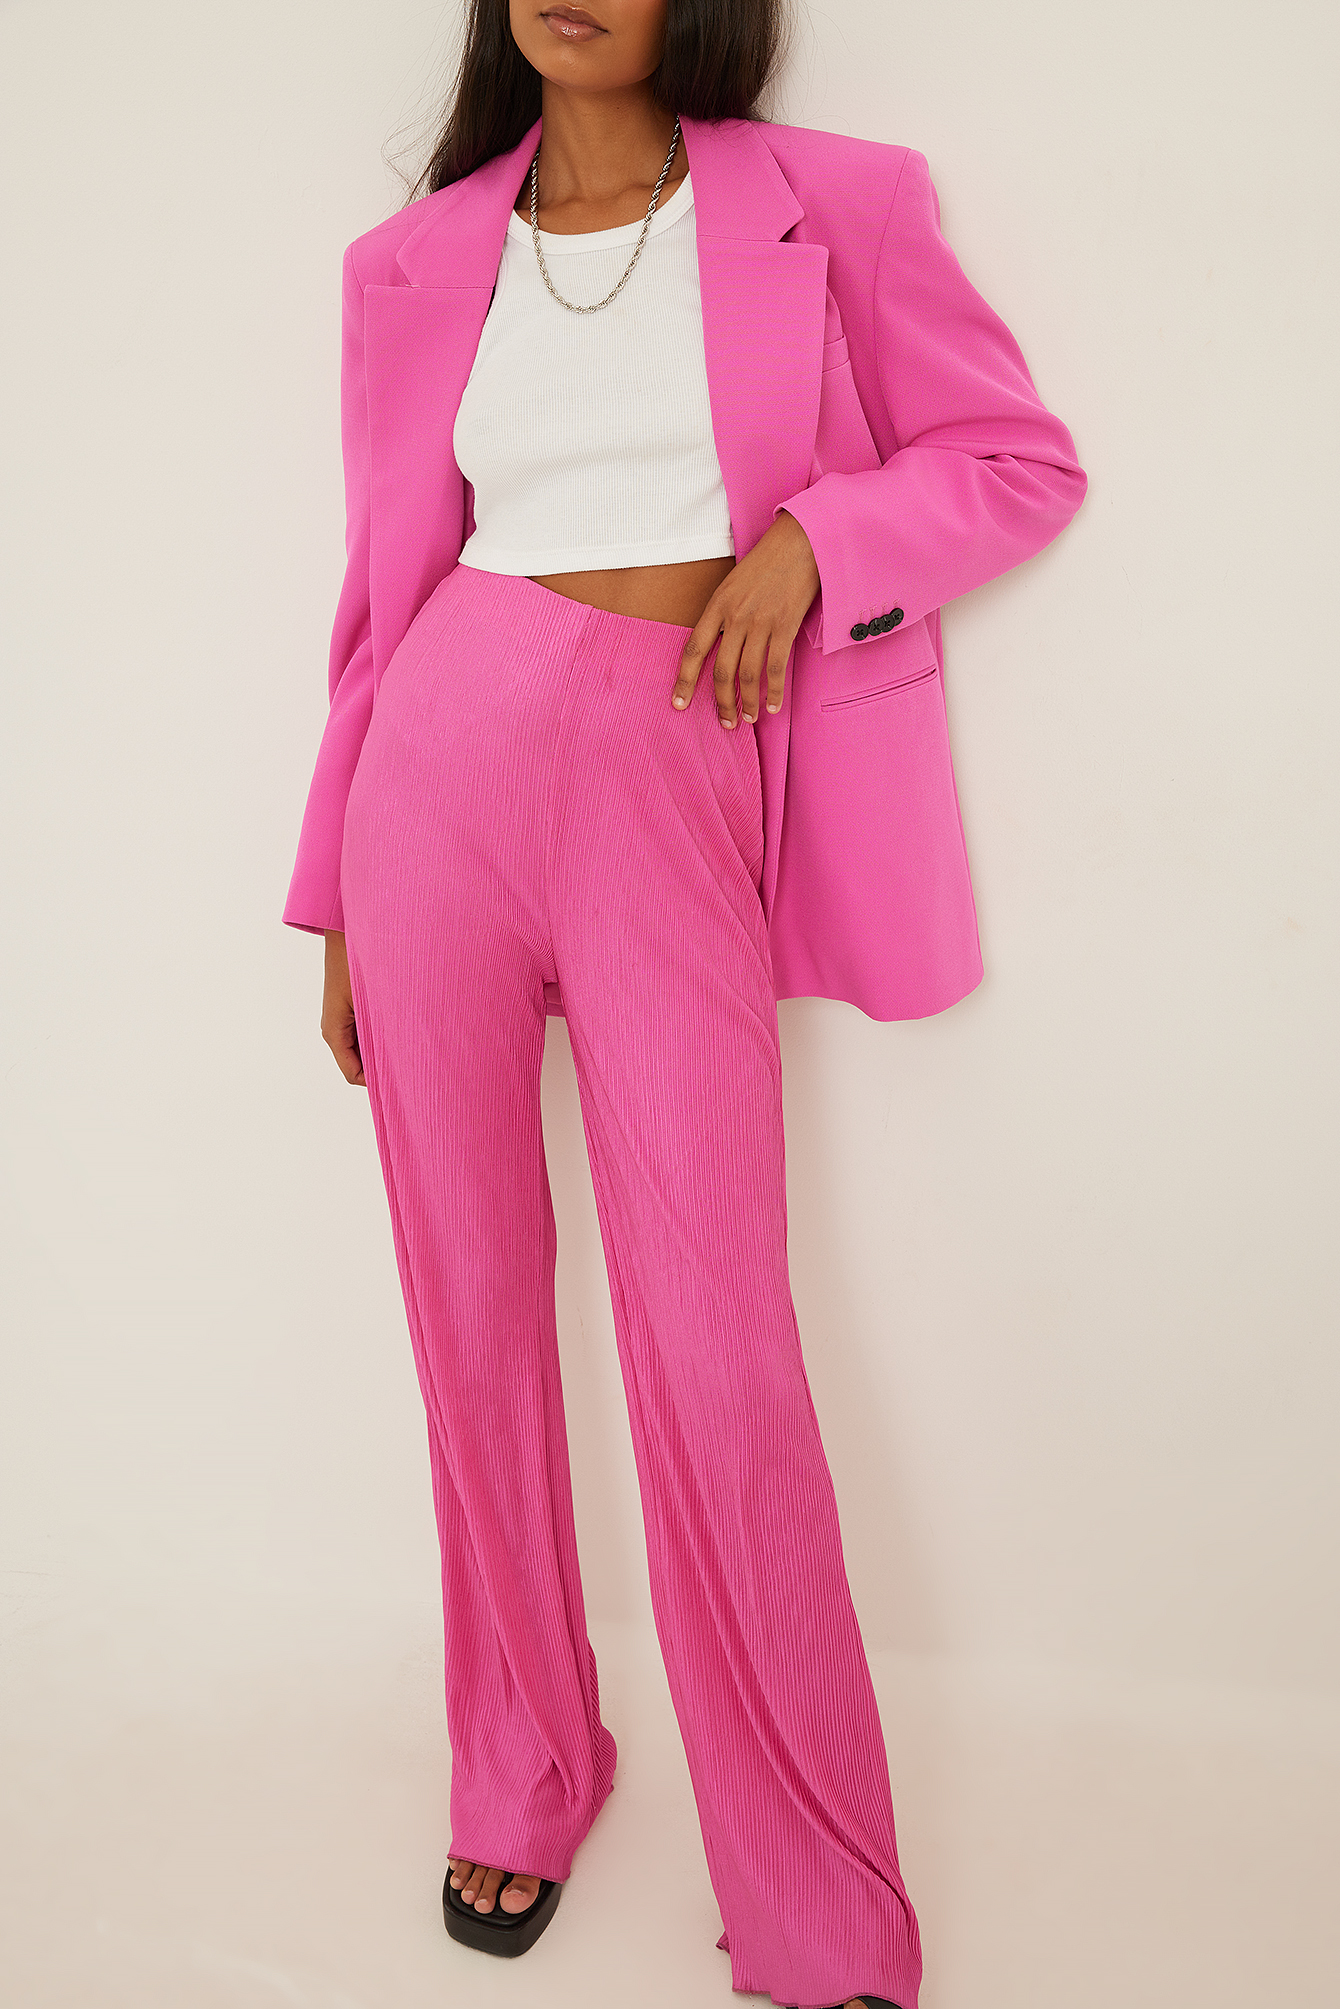 Shop Pink Satin Cargo Trouser Pants Online at Best Price